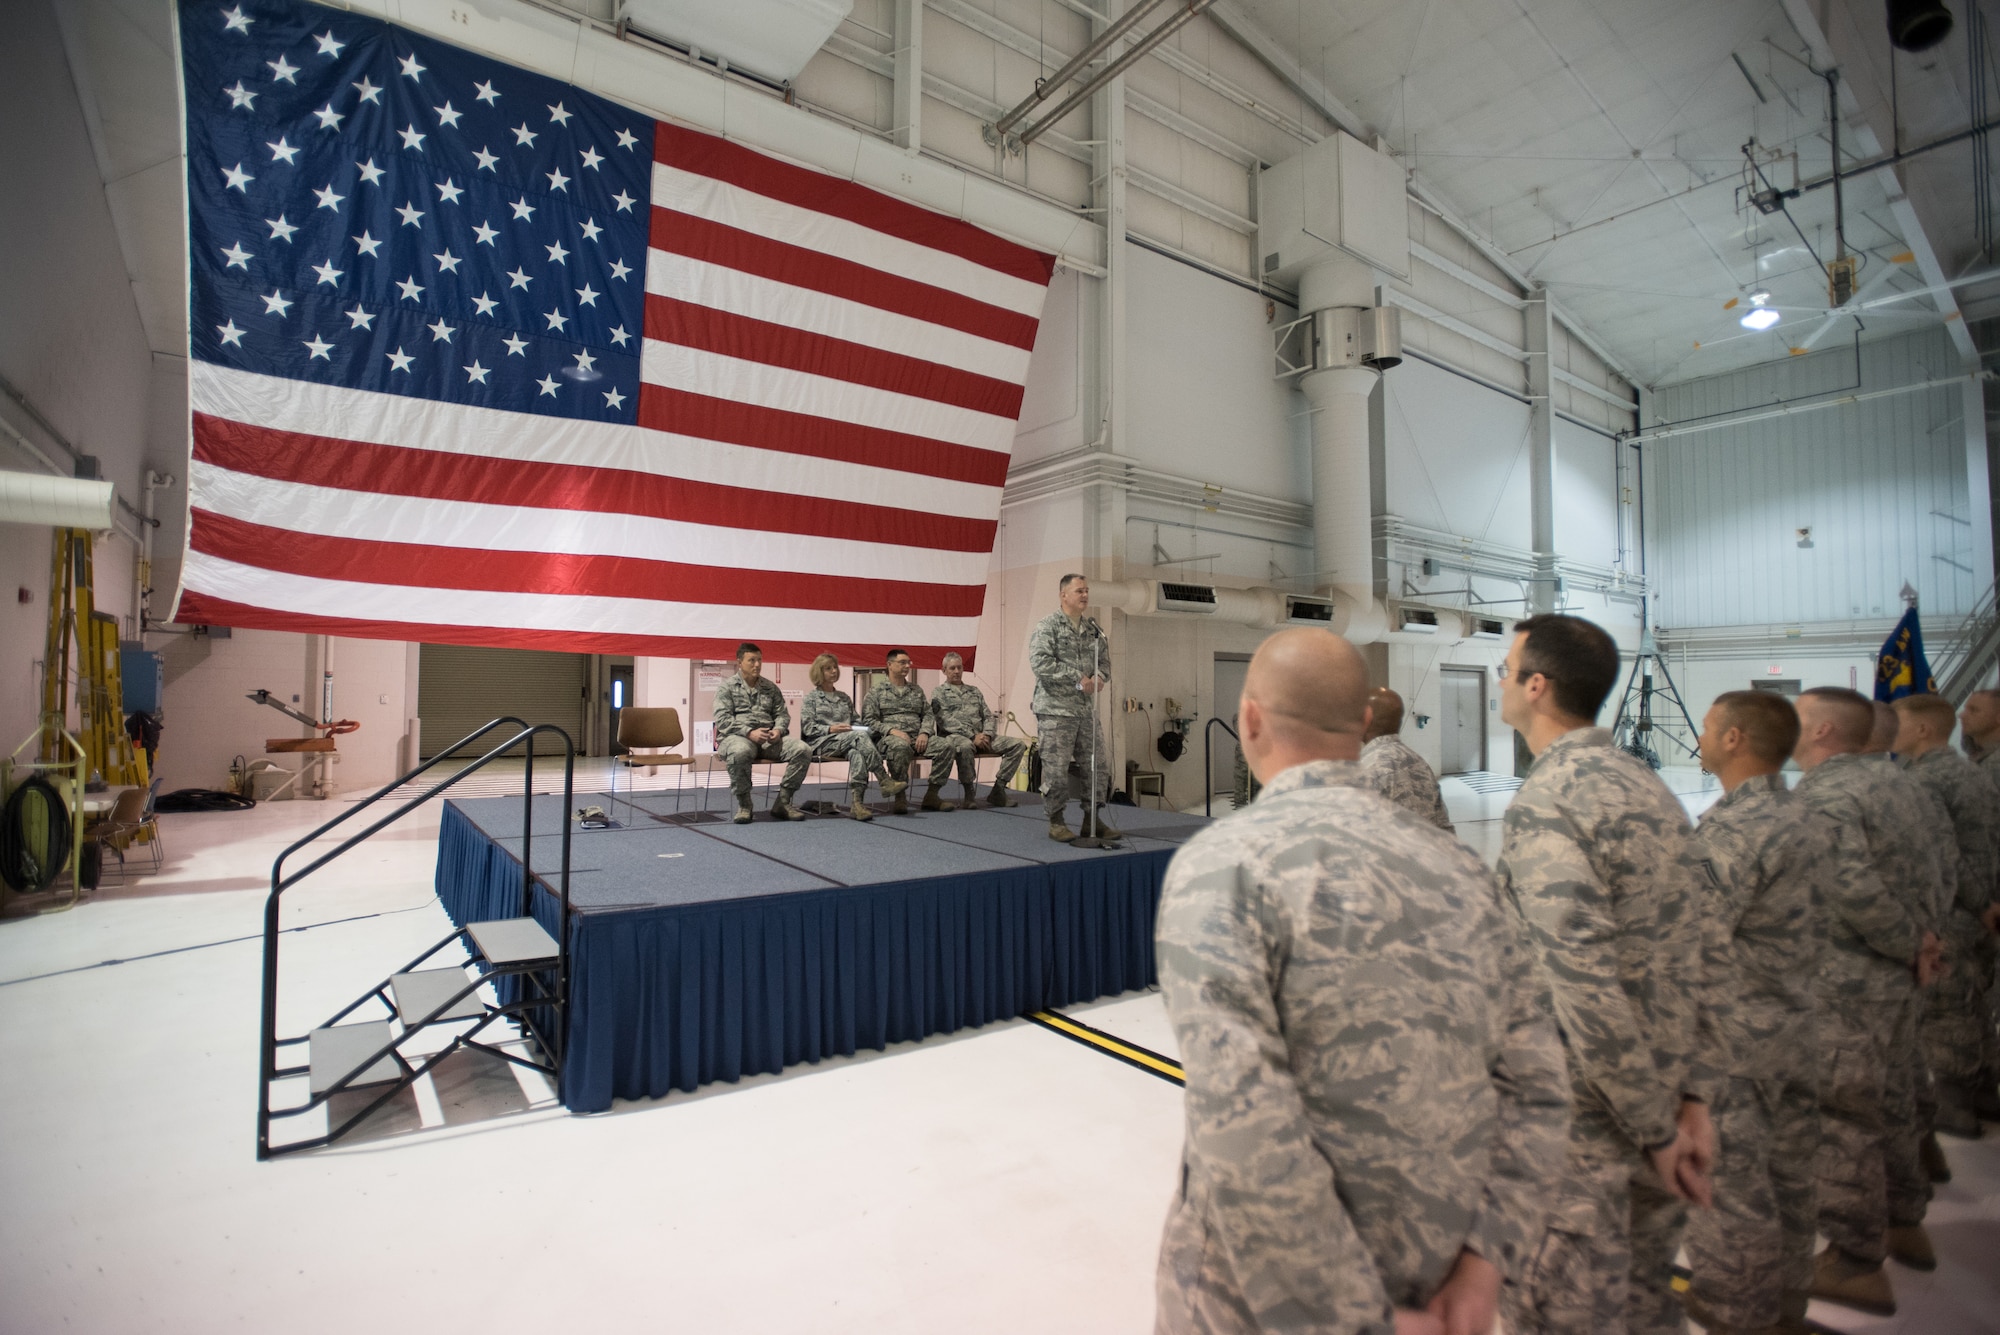 Col. Scott Chambers, the National Guard Bureau’s deputy director of logistics for installations, addresses members of the 123rd Civil Engineer Squadron in the Fuel Cell Hangar at the Kentucky Air National Guard Base in Louisville, Ky., Nov. 11 2016. The unit was just named the top civil engineering unit in the Air National Guard and the Air Reserve Component. (U.S. Air National Guard photo by Master Sgt. Phil Speck)

